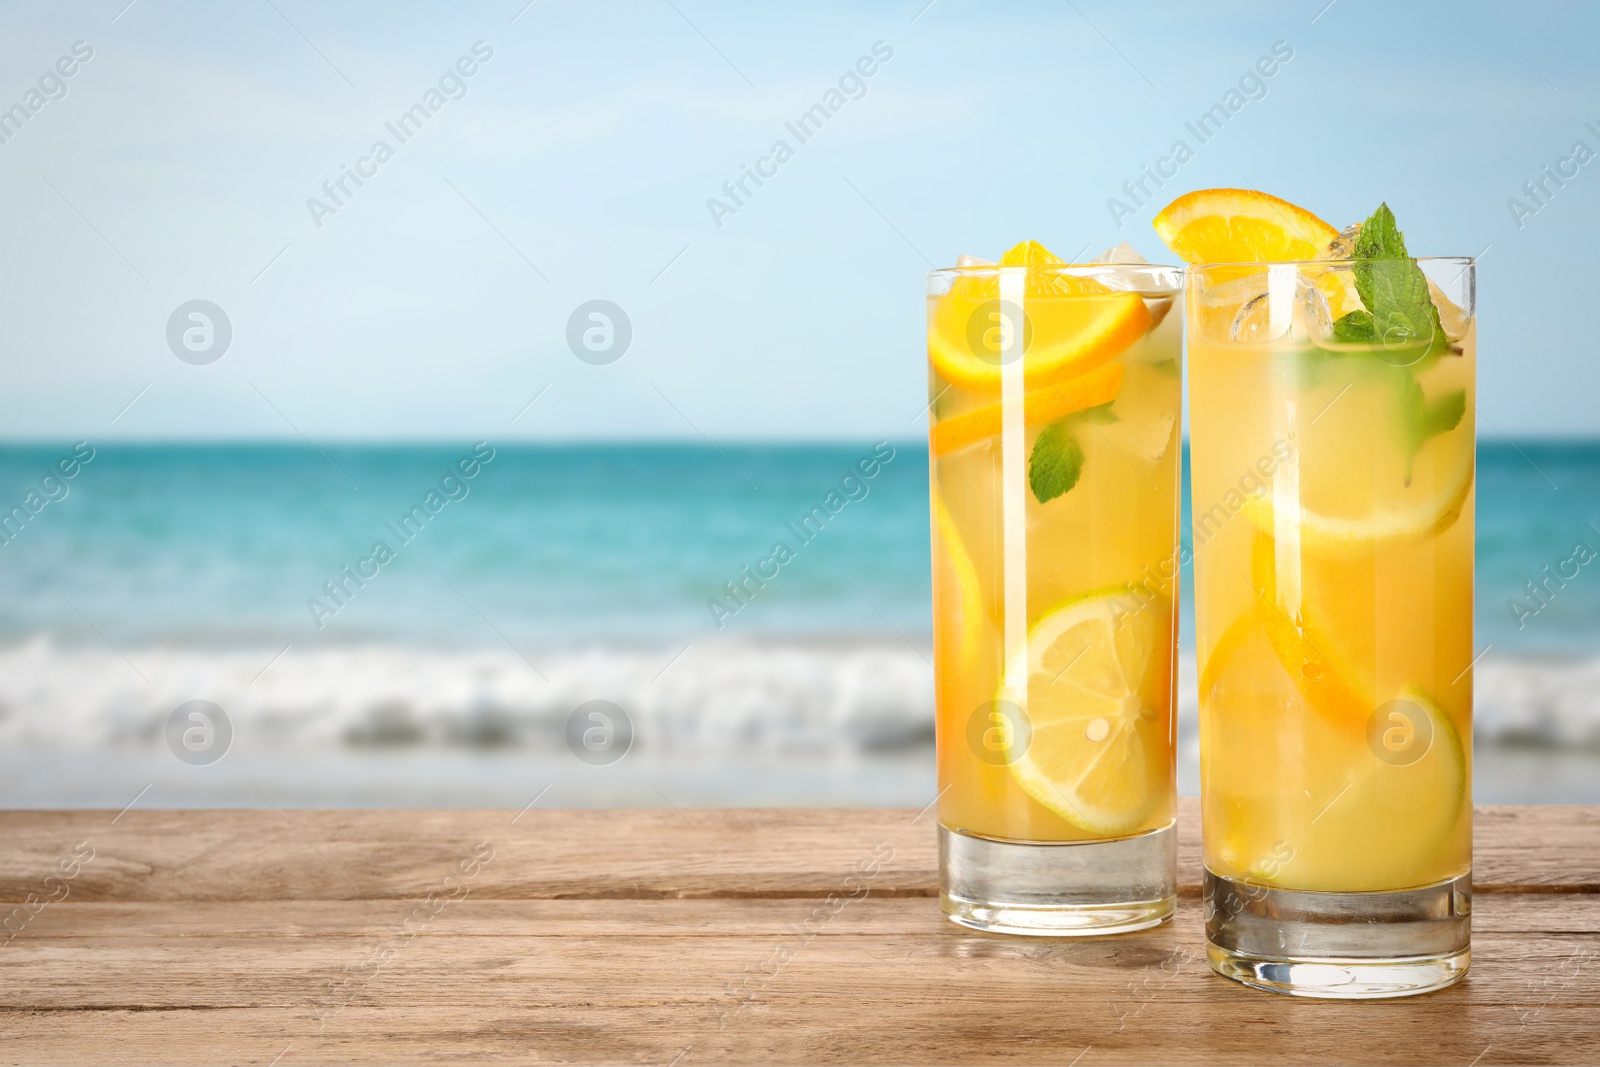 Image of Glasses of refreshing lemonade on wooden table near sea, space for text